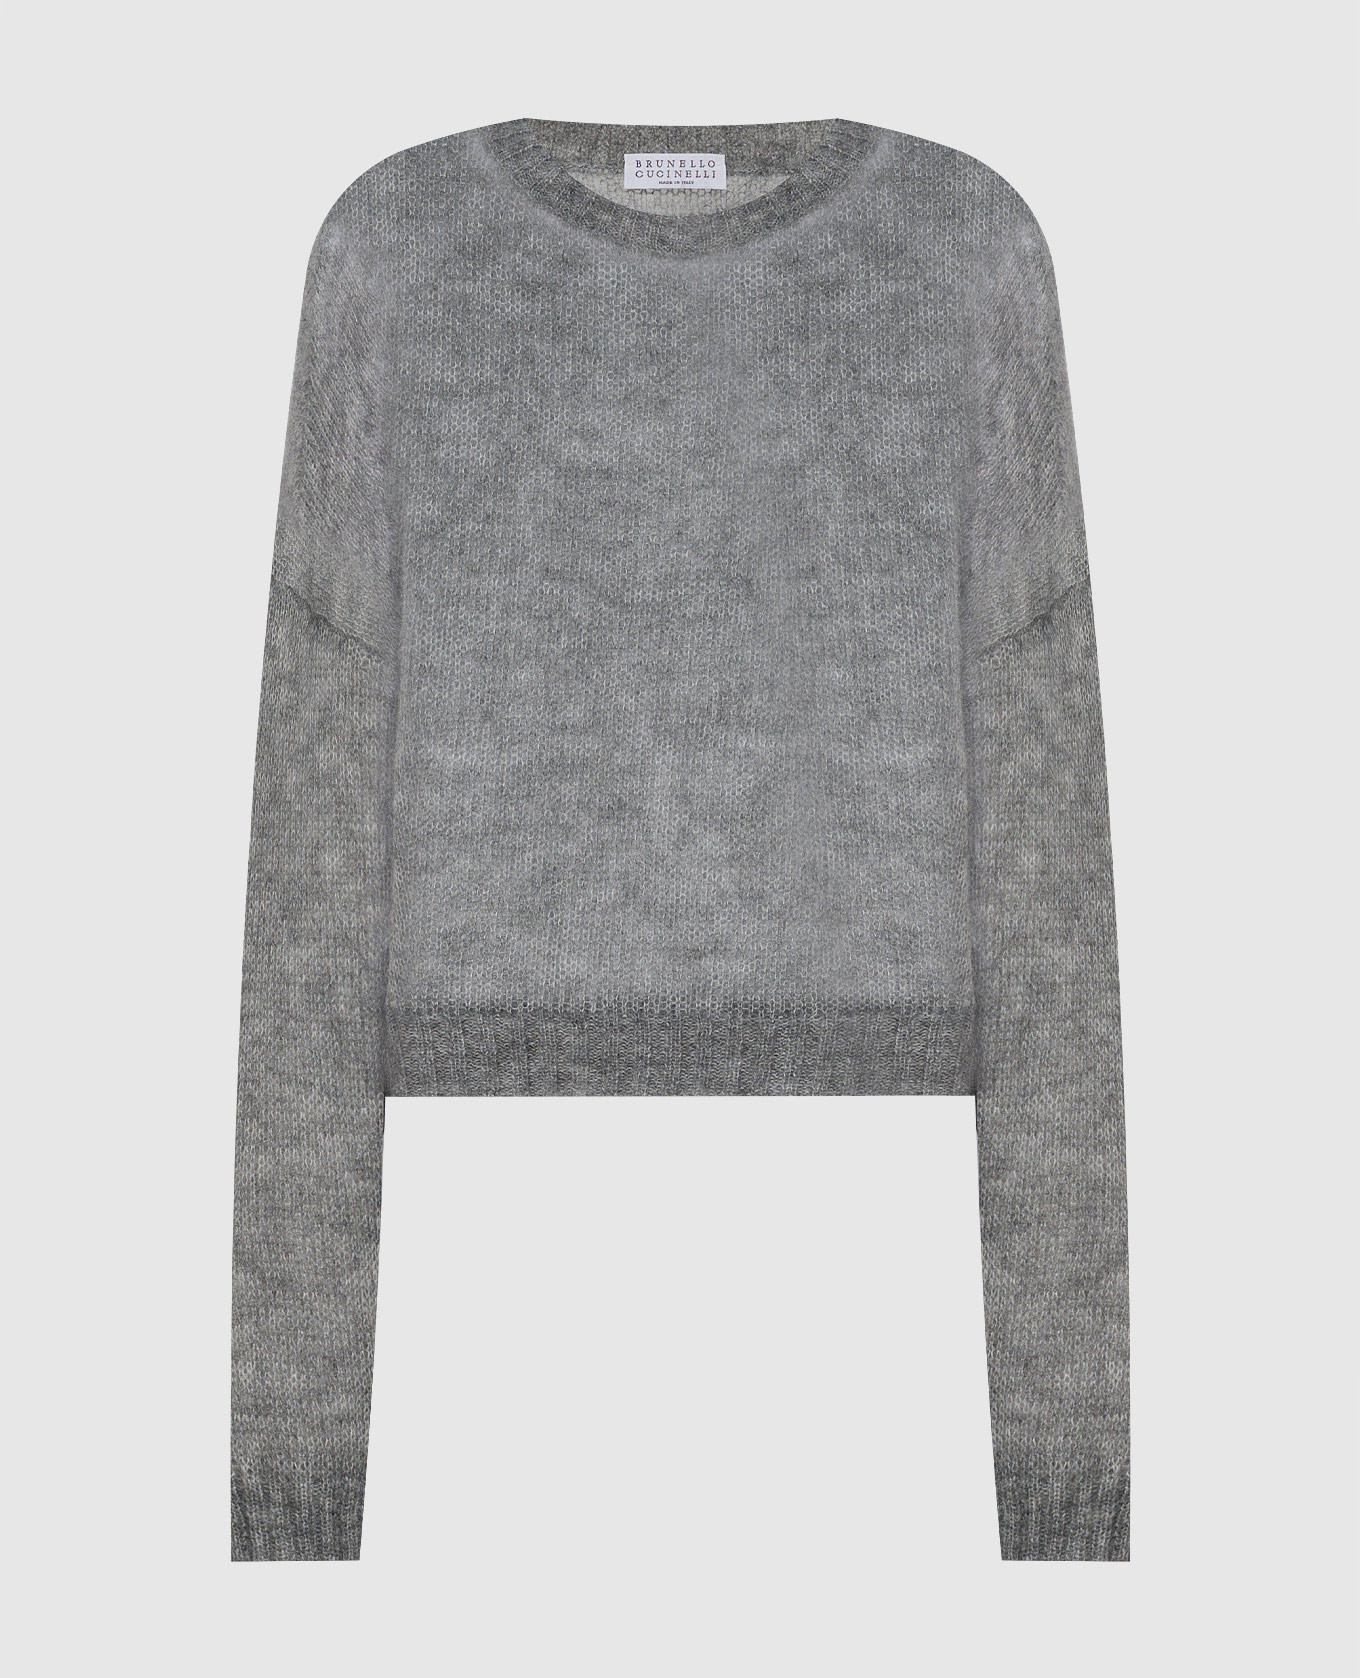 Gray wool jumper with monil chain